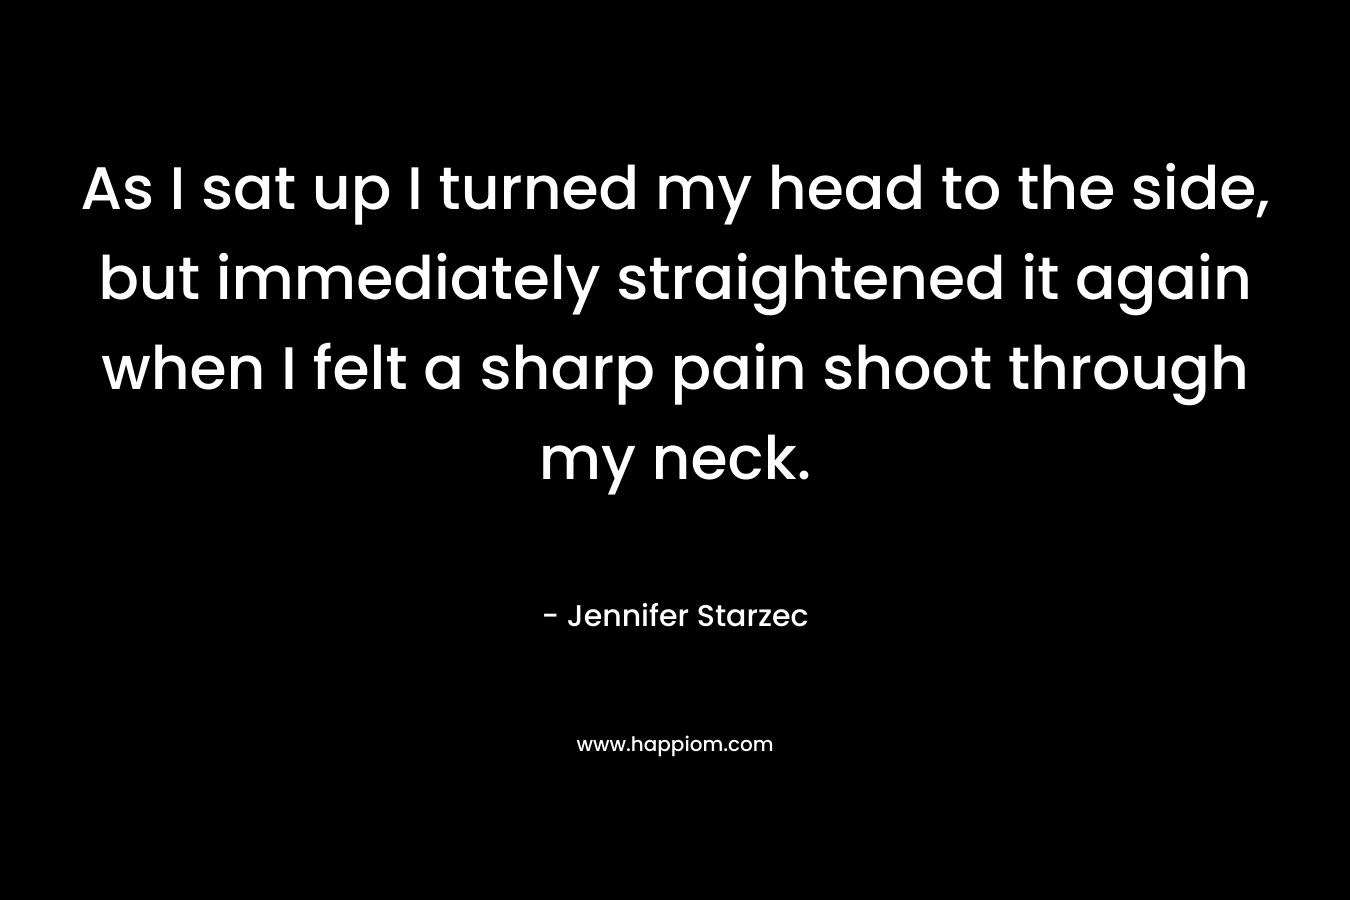 As I sat up I turned my head to the side, but immediately straightened it again when I felt a sharp pain shoot through my neck. – Jennifer Starzec